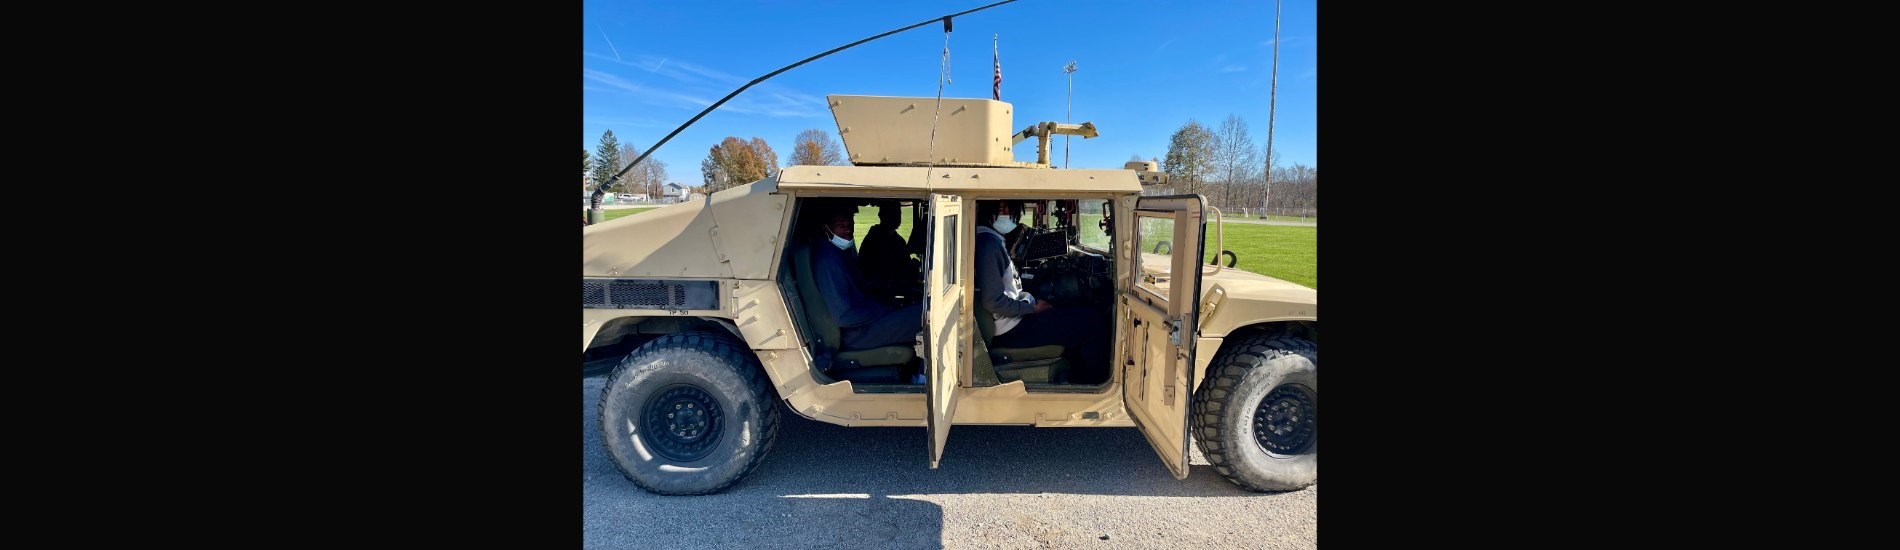 High school students in the humvee loaned by the Arsenal